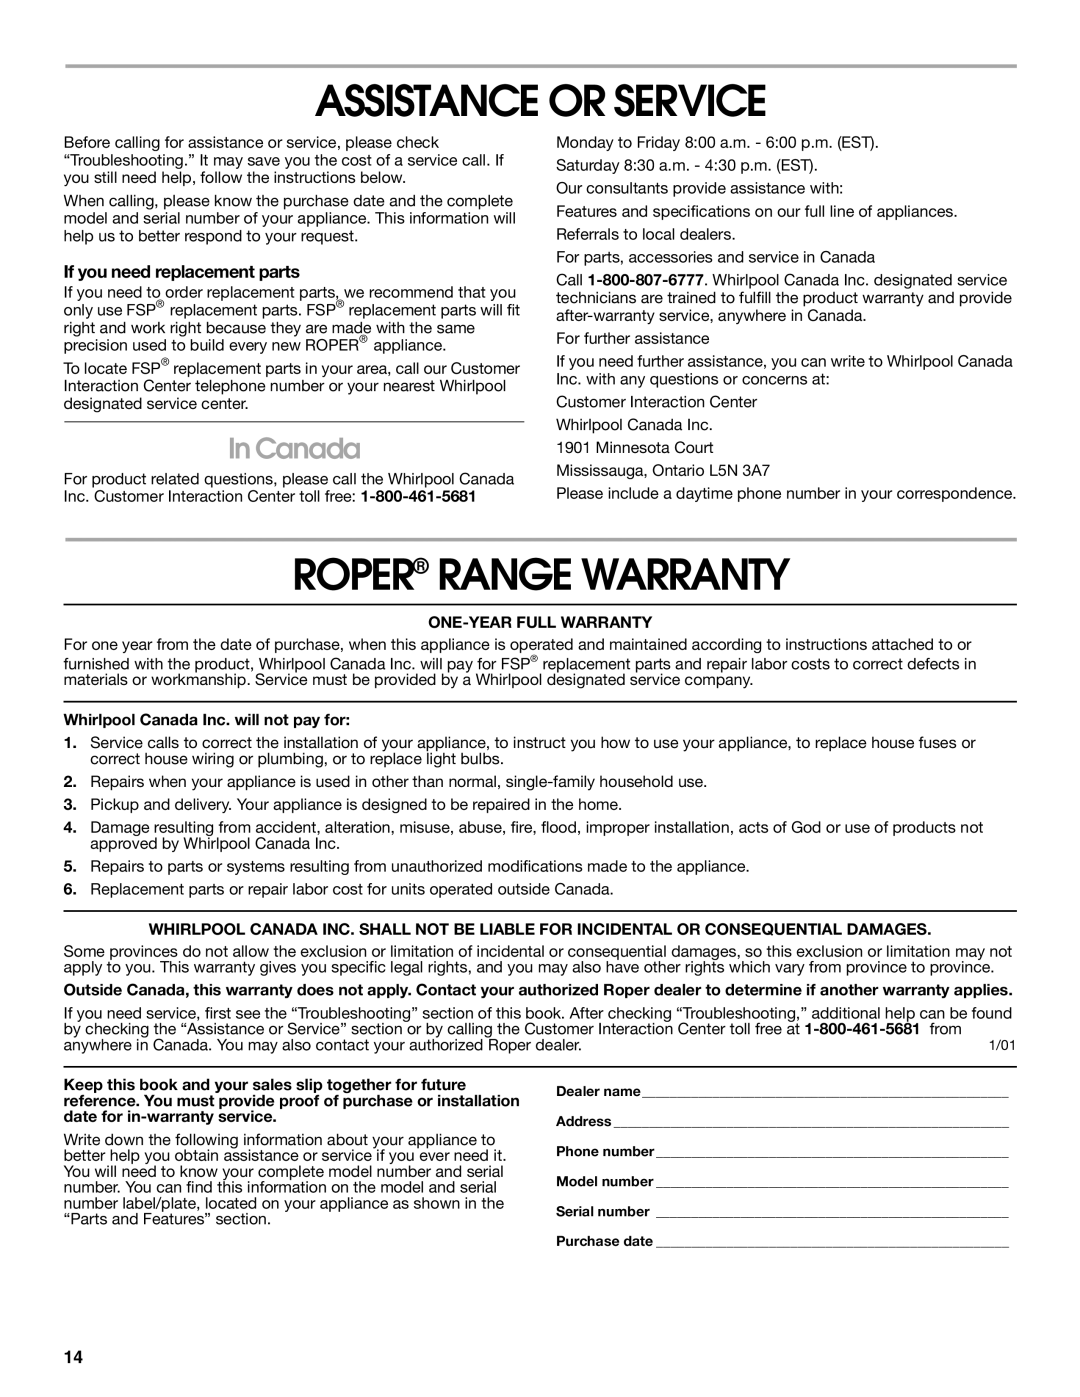 Whirlpool RME30000 manual Assistance Or Service, Roper Range Warranty, In Canada, If you need replacement parts 